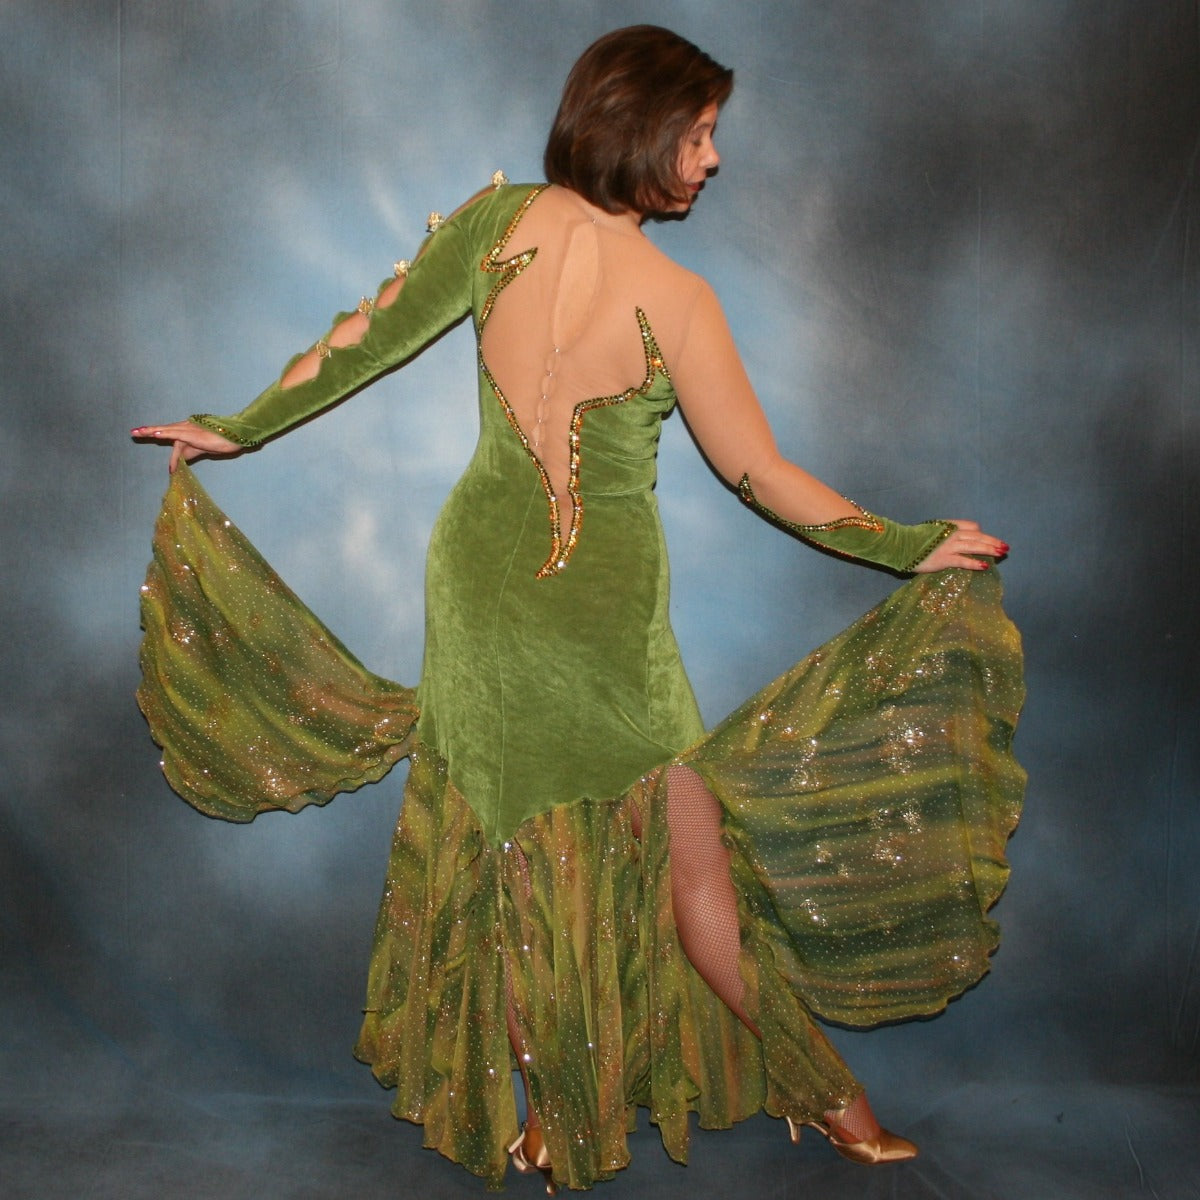 Crystal's Creations back view of Green ballroom dress created of luxurious olive green solid slinky on nude illusion base with glitter chiffon print flounces of olive greens & gold… embellished with olivine, jonquil & peach Swarovski rhinestones.